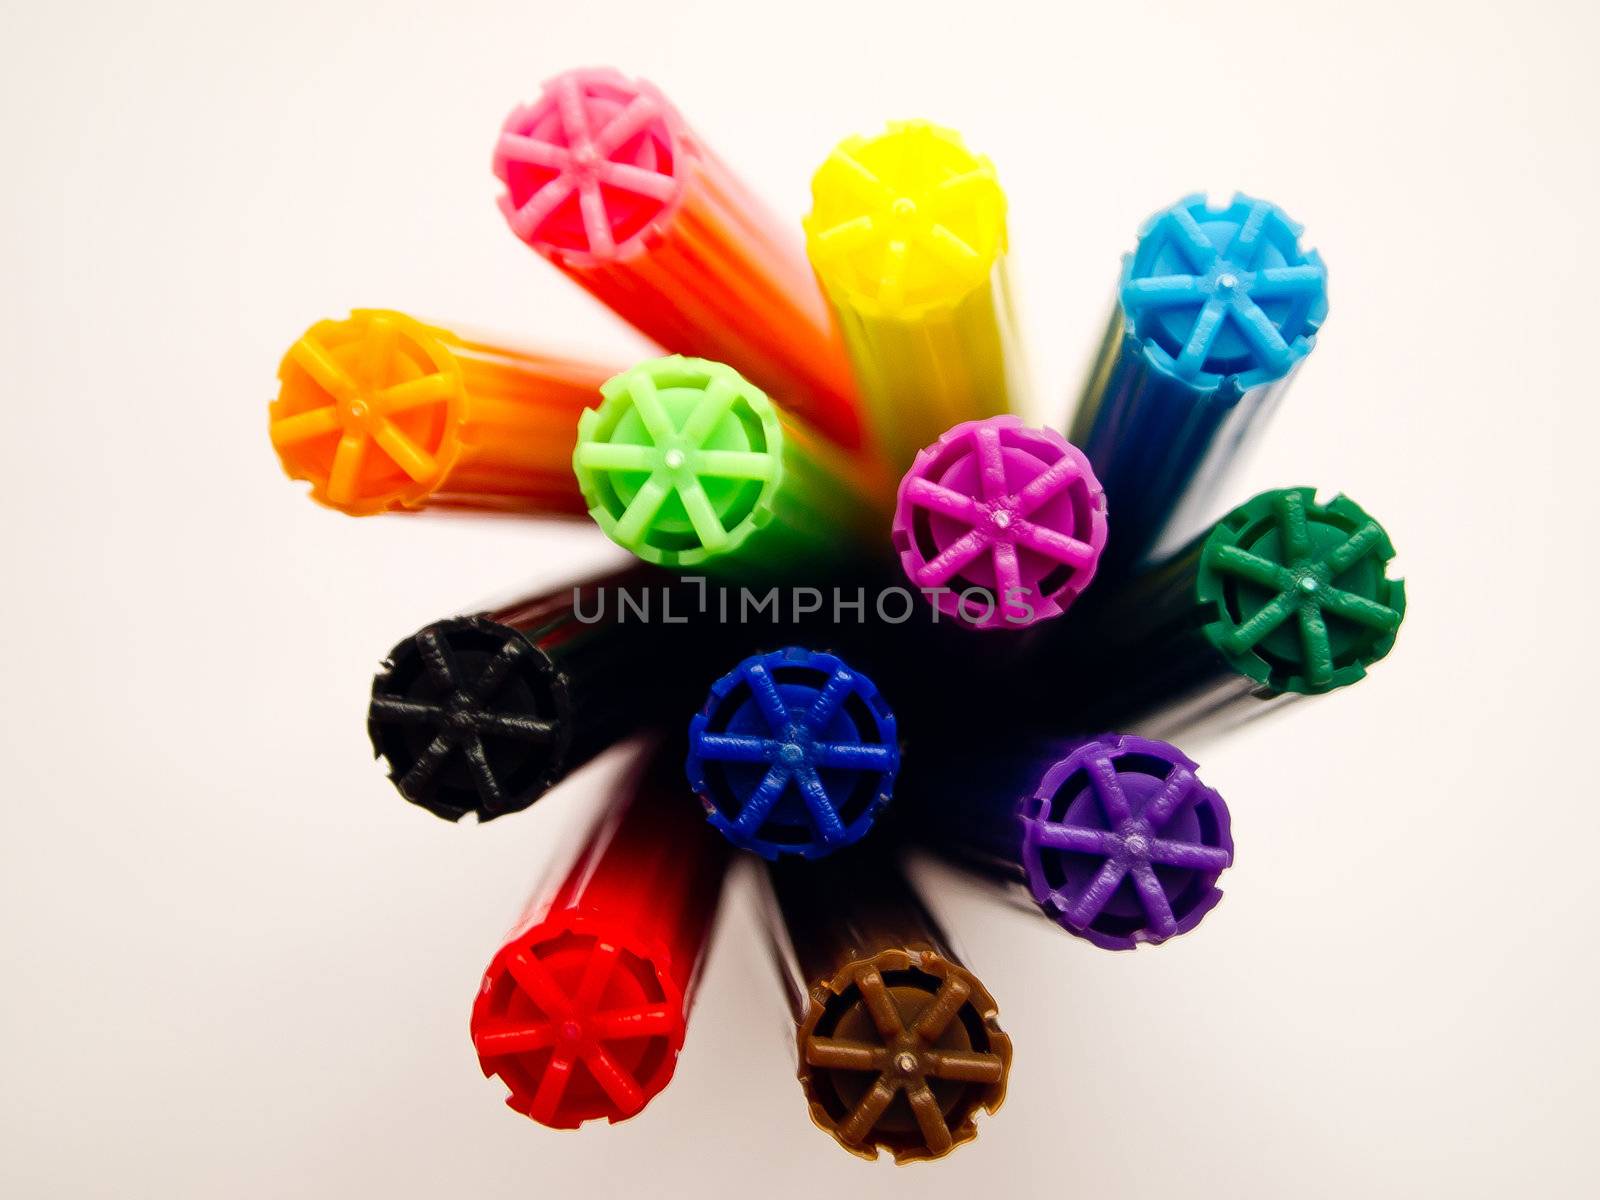 Head of colorful pens on white background by gjeerawut